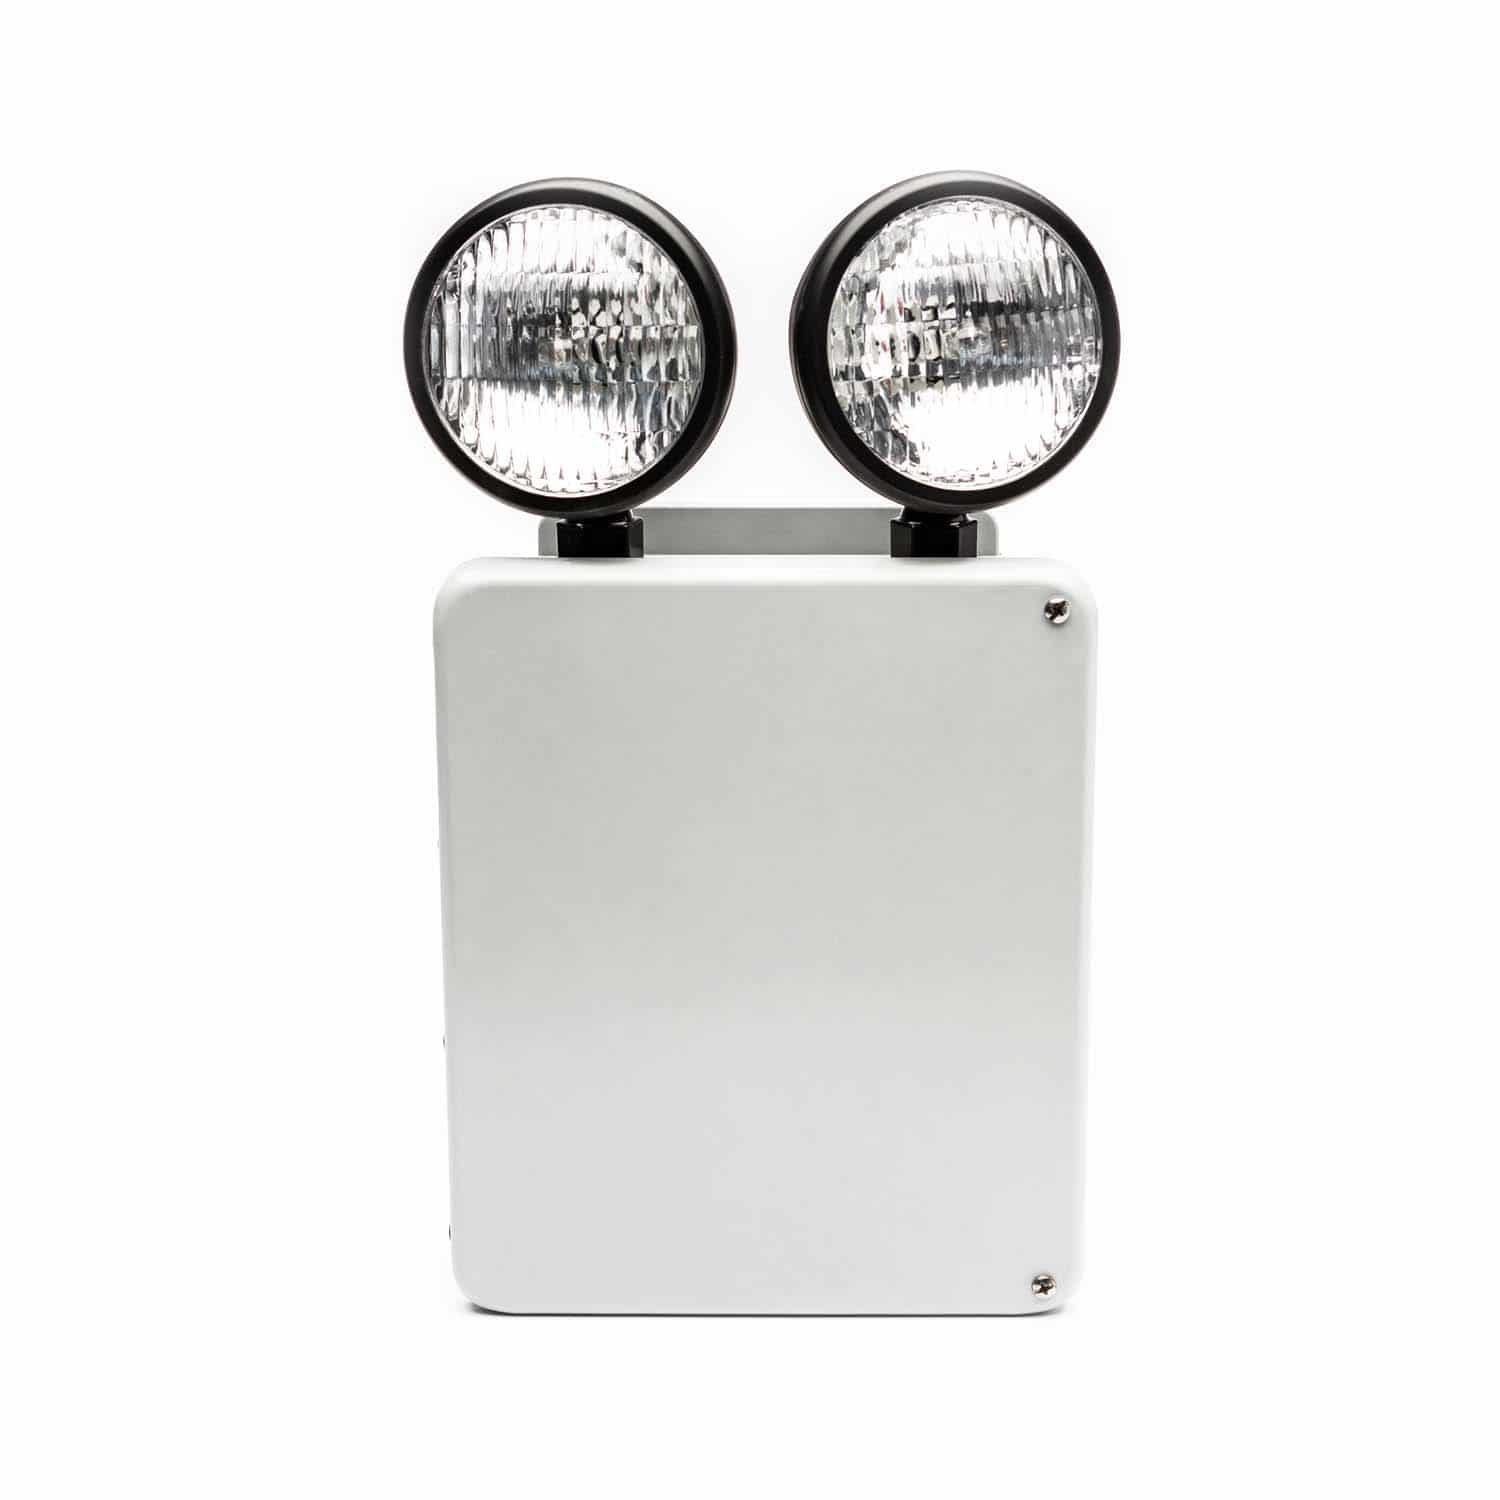 18-360 Watt Emergency Light that is durable and is NEMA 4X rated. The Isolite HL.